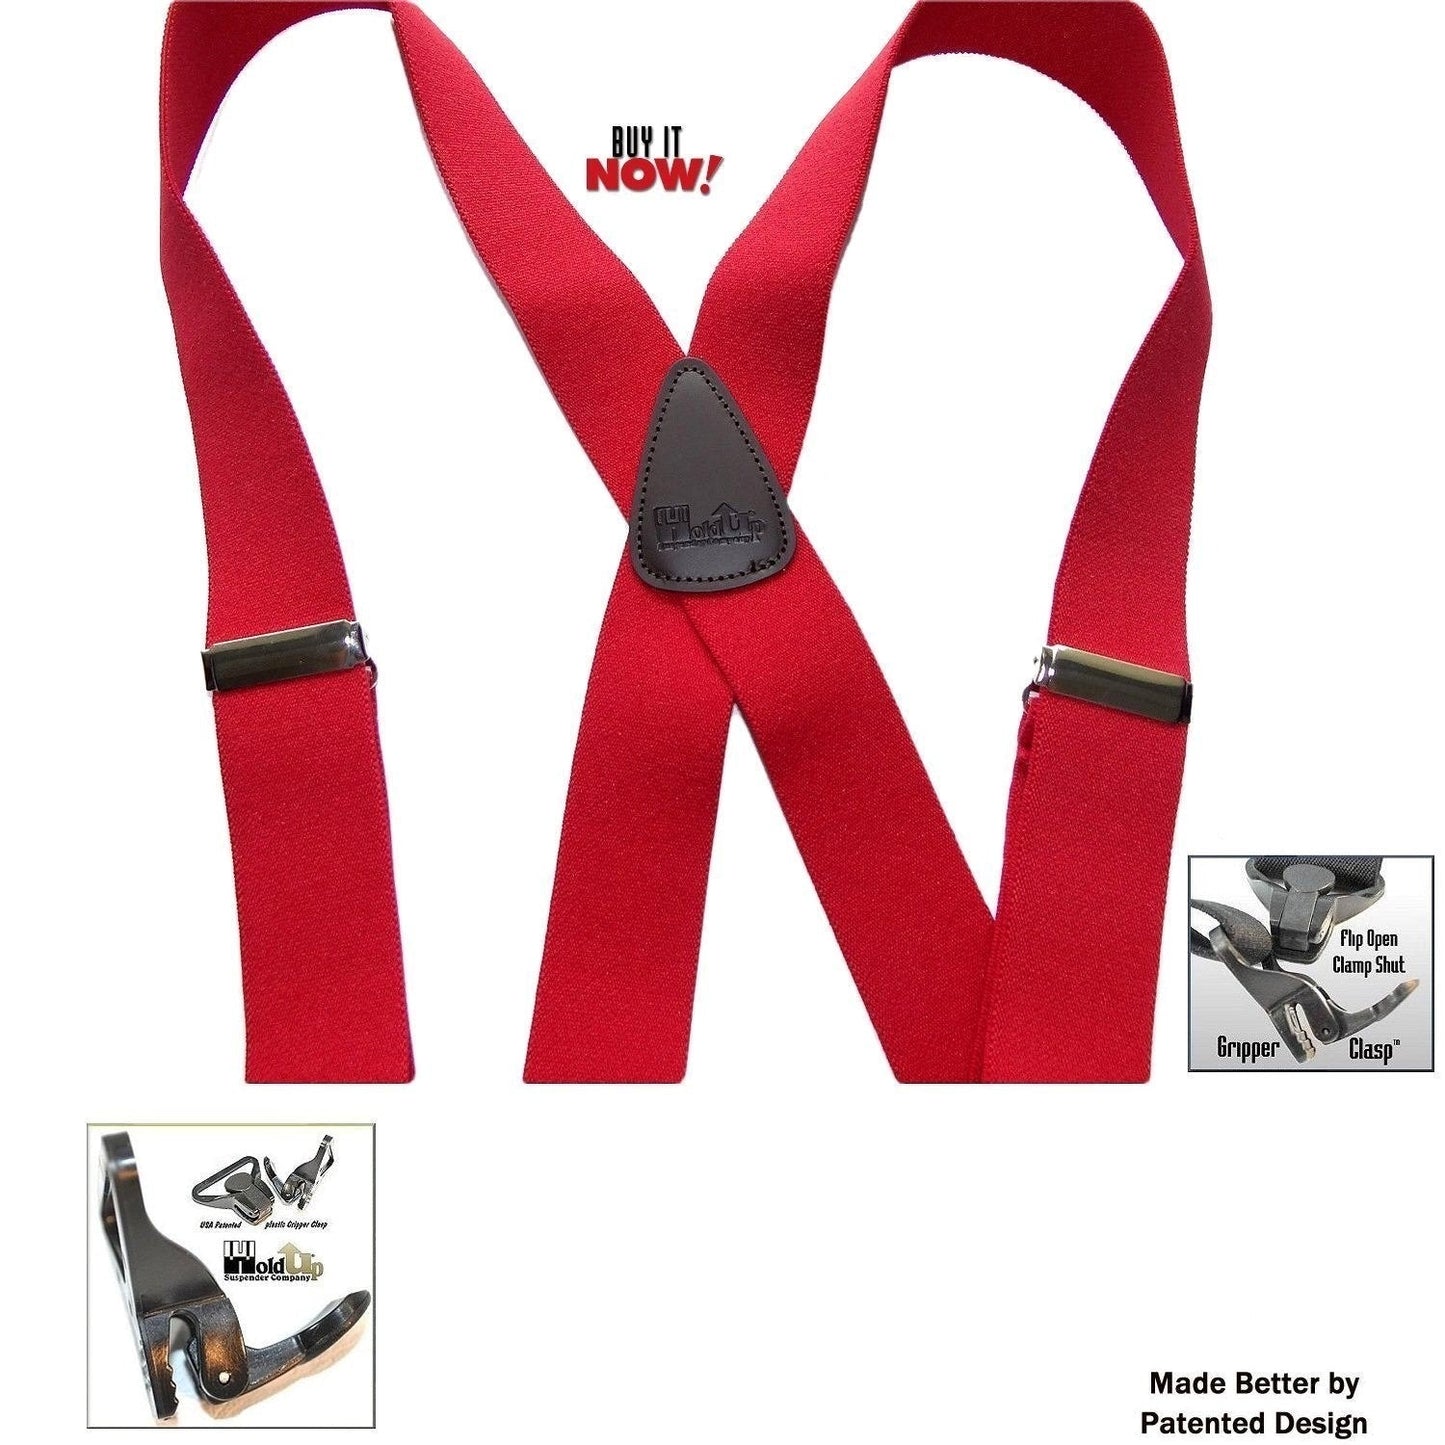 Holdup Brand XP Classic Bright Red X-back Suspenders with Patented Gripper Clasps